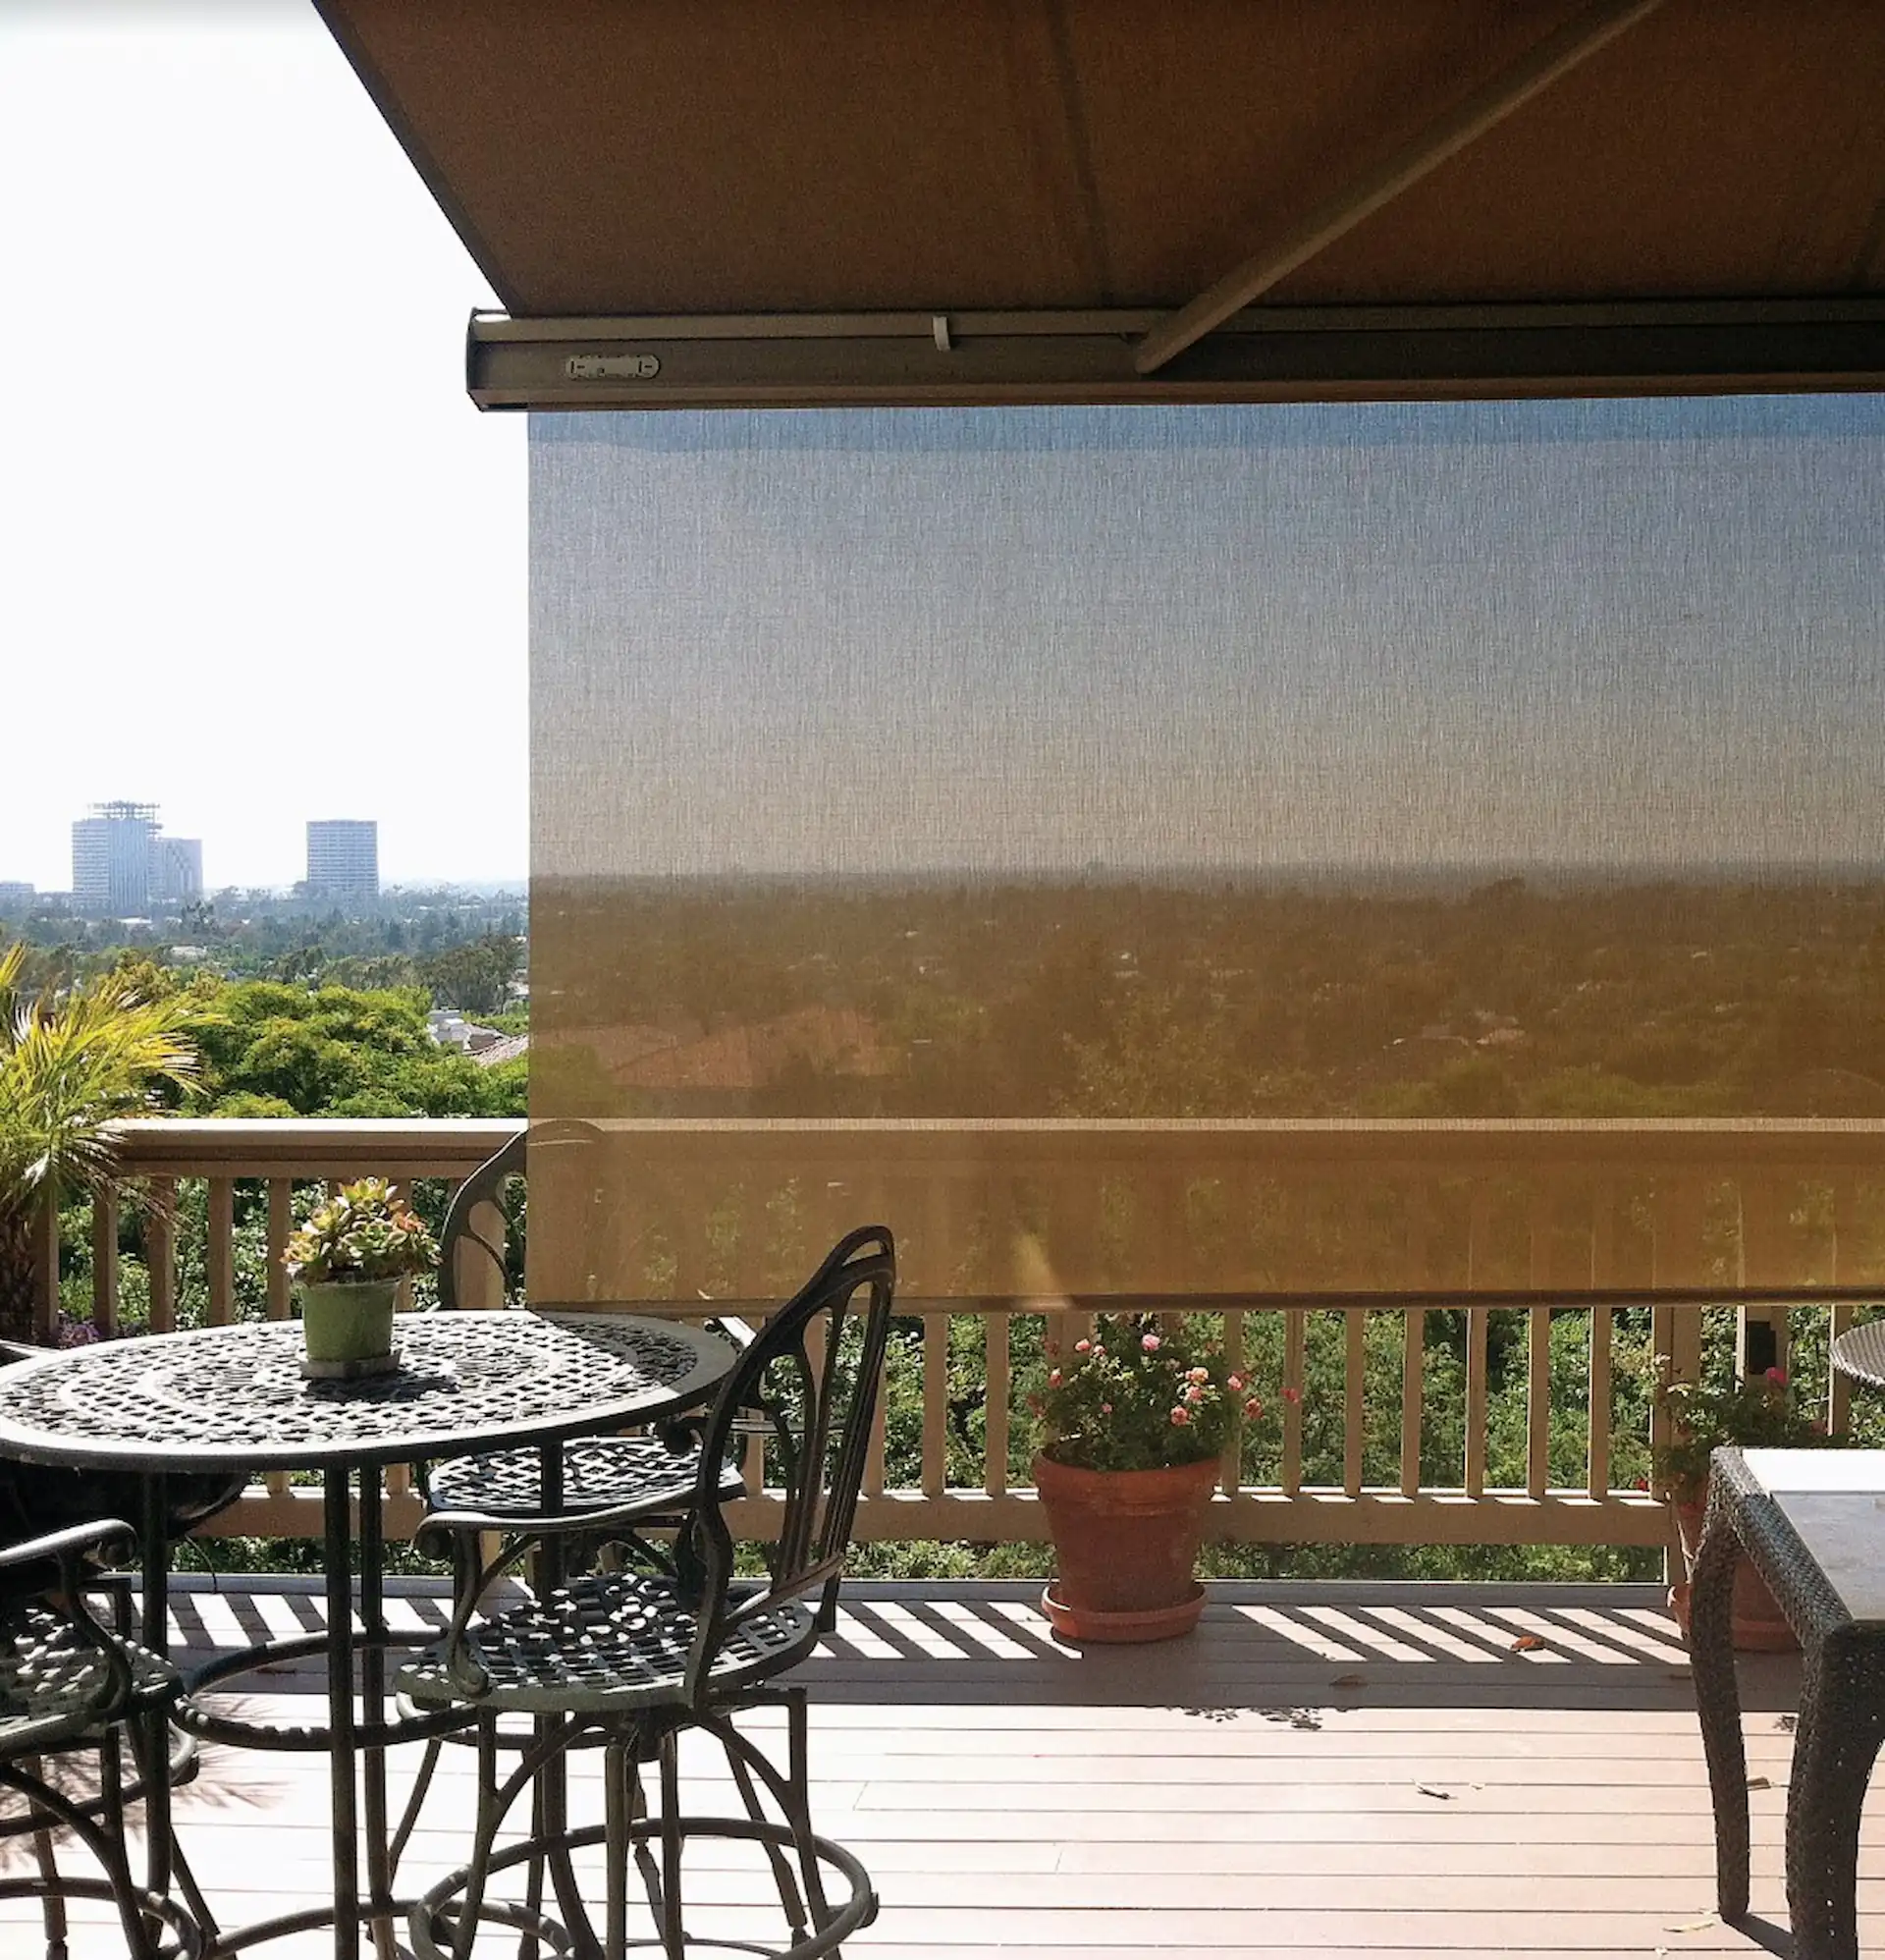 Medium shot of a drop screen hanging from the front bar of a retractable awning.